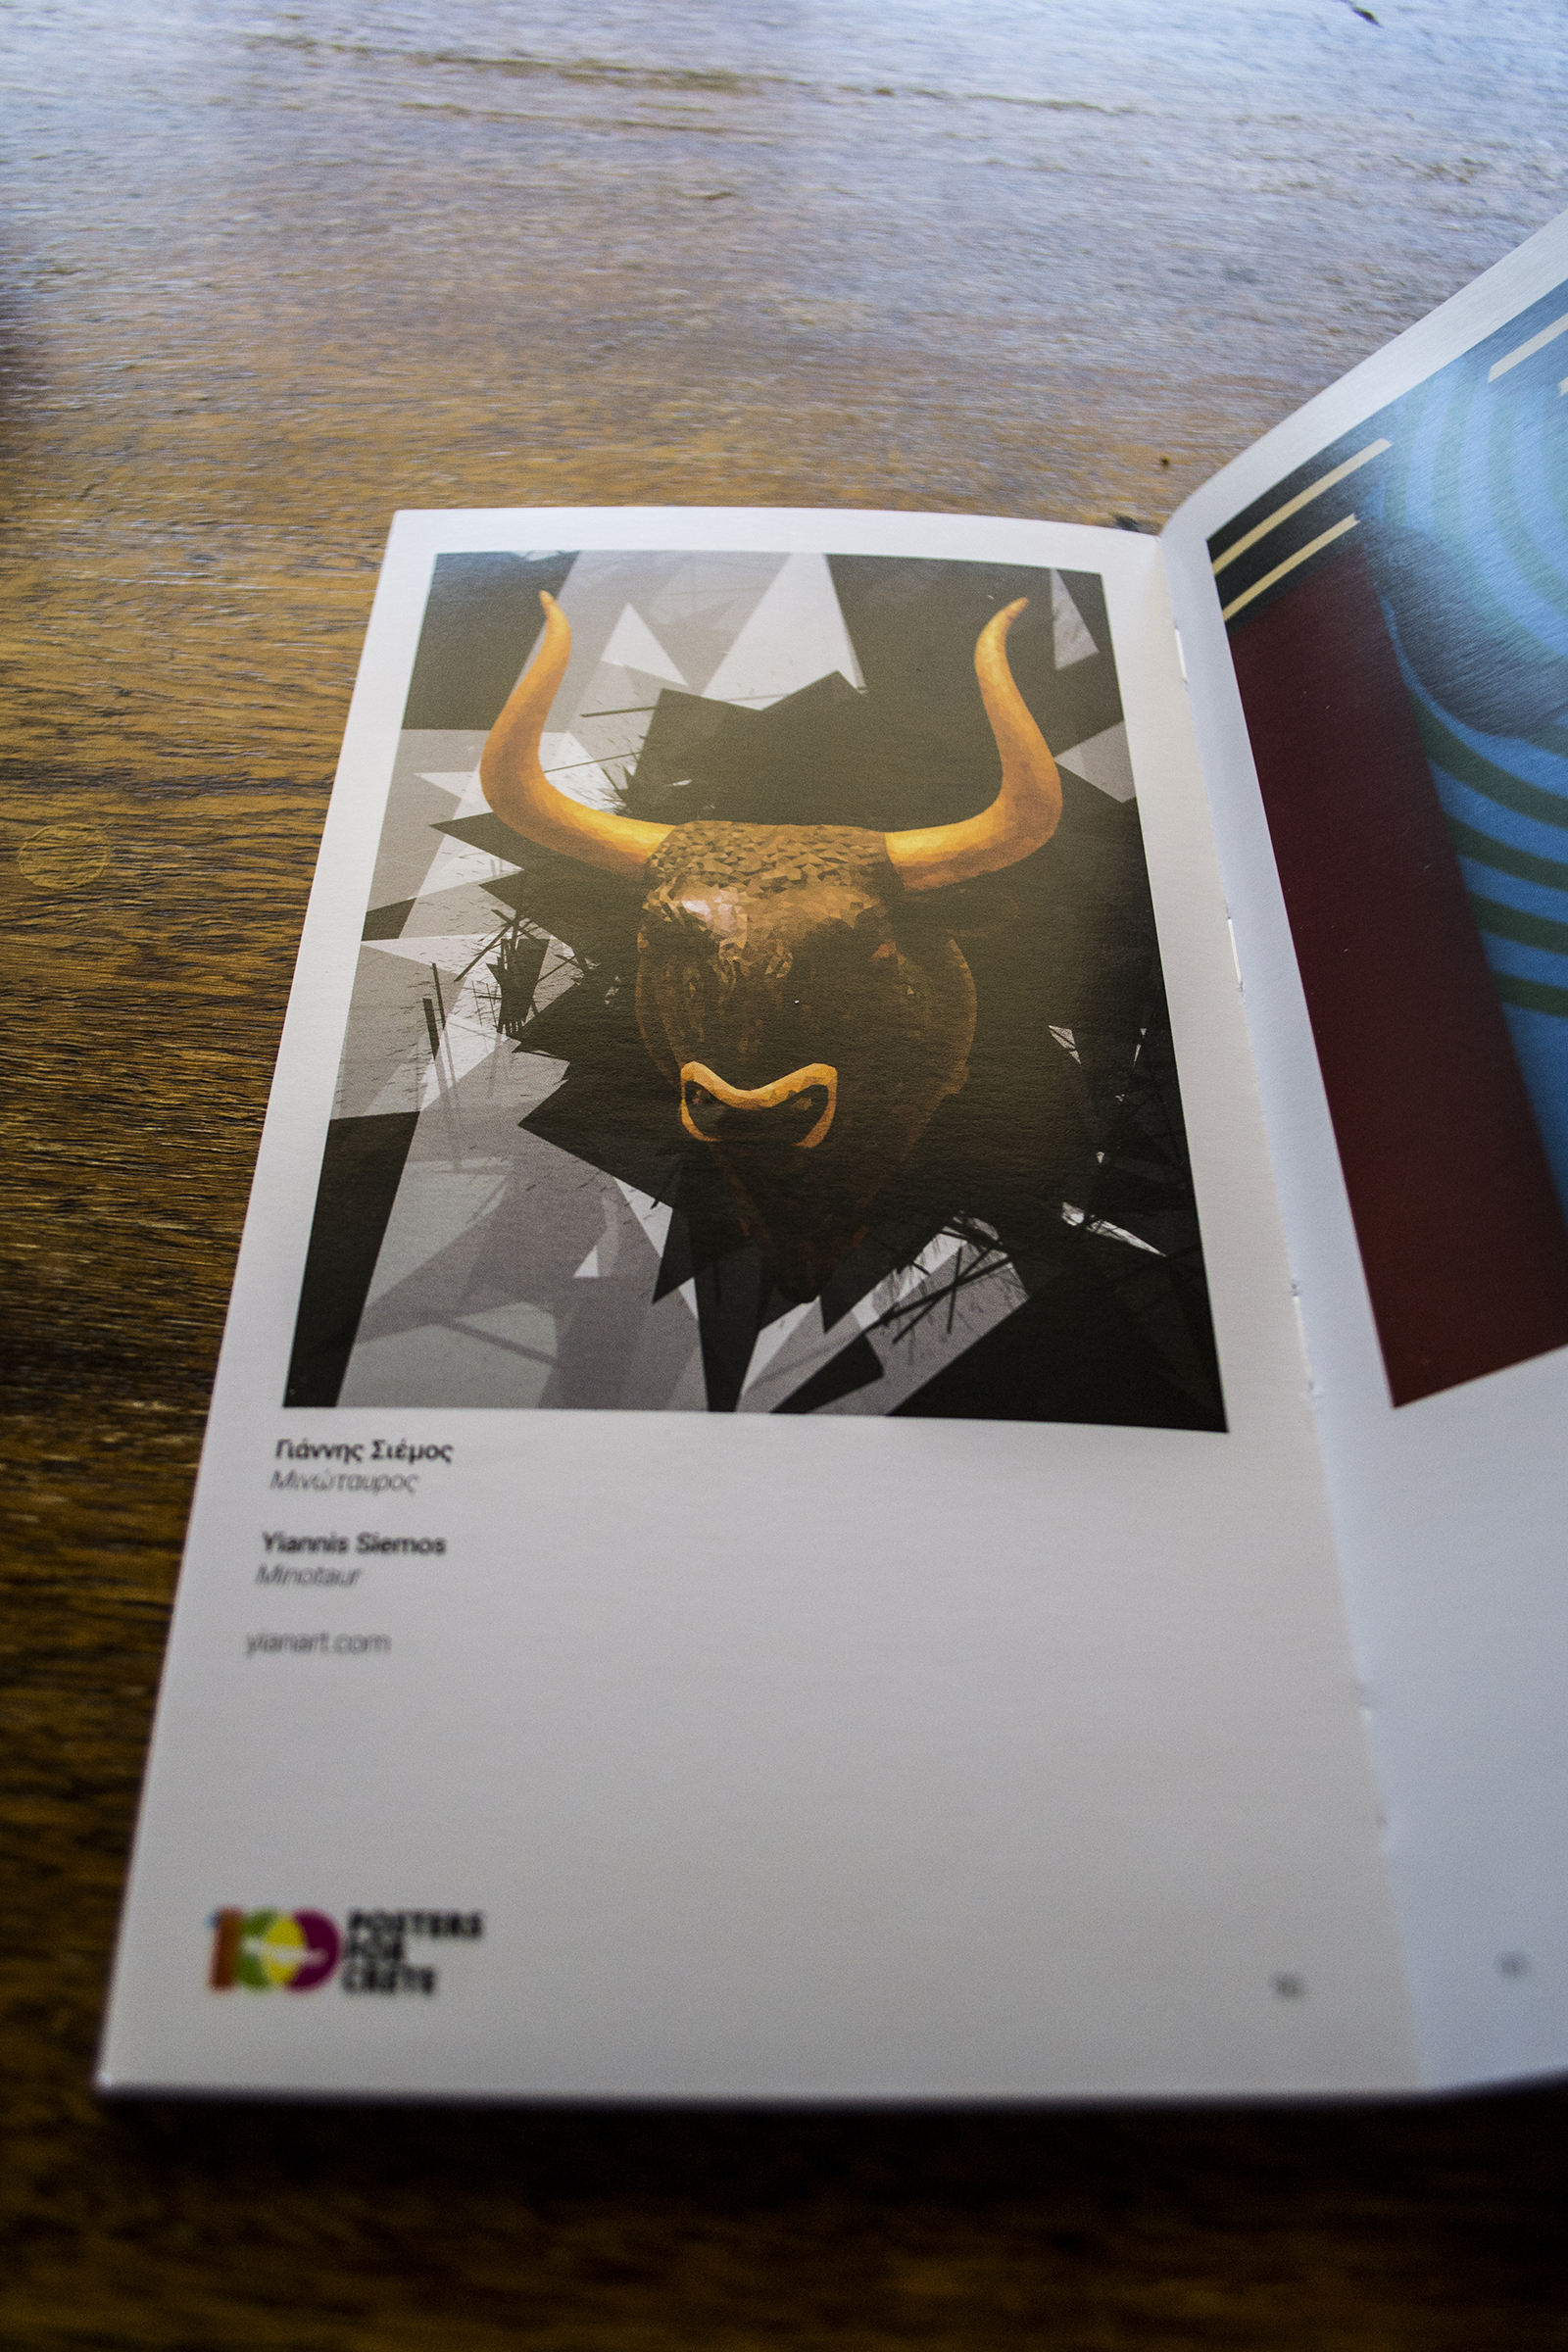 Minotaur_100 posters for Crete_Exhibition Book #3_Siemos Yiannis_yianart.com